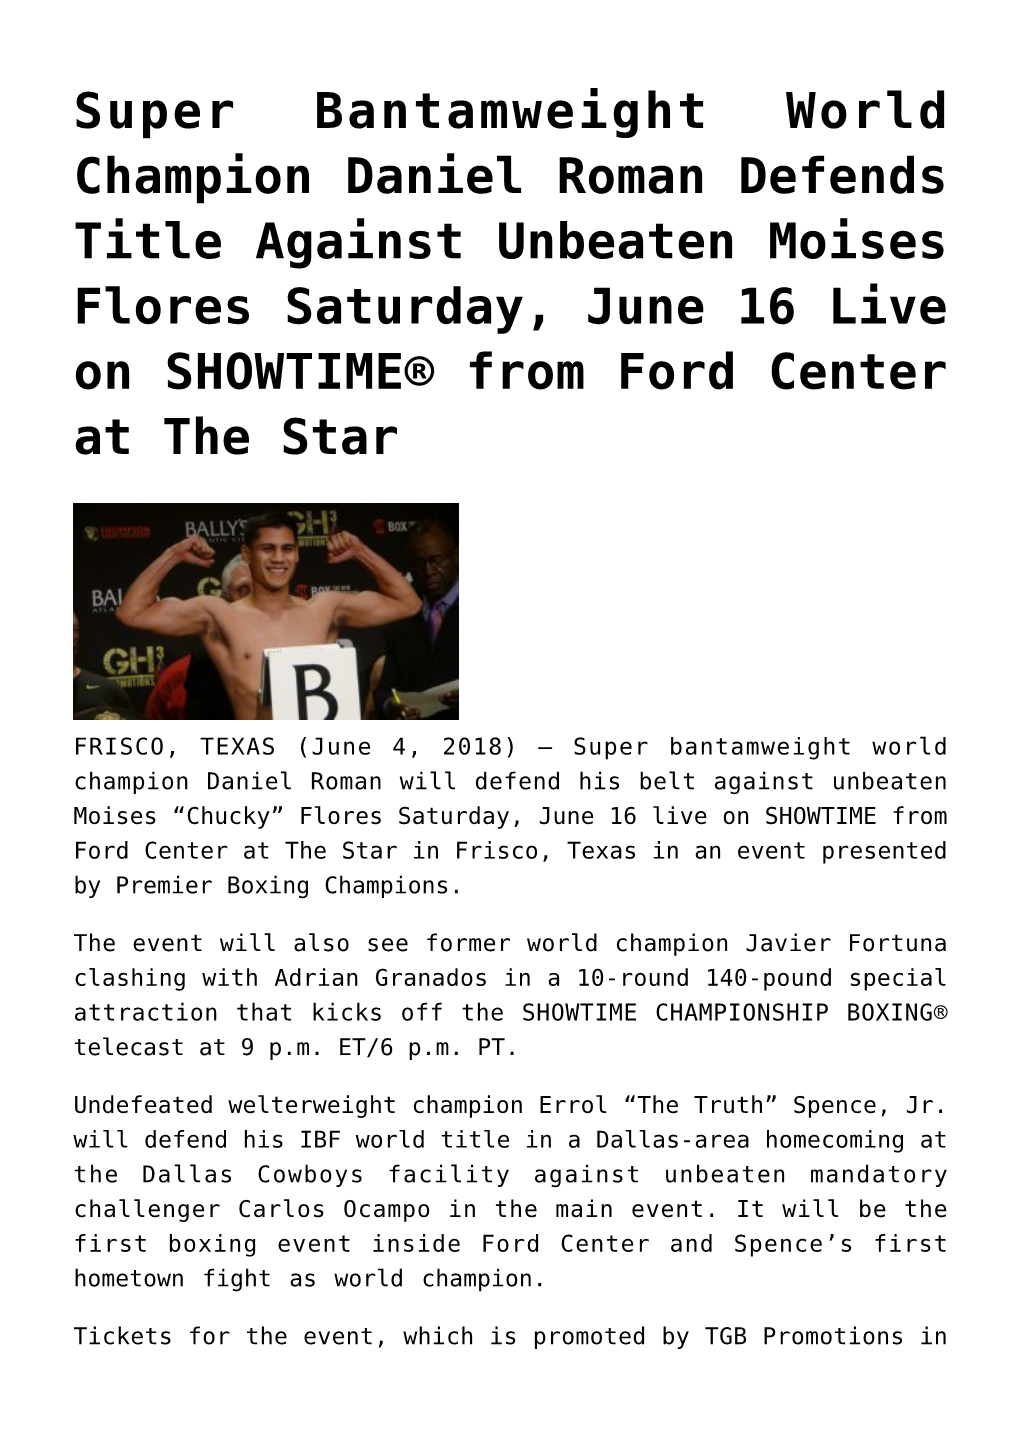 Super Bantamweight World Champion Daniel Roman Defends Title Against Unbeaten Moises Flores Saturday, June 16 Live on SHOWTIME® from Ford Center at the Star